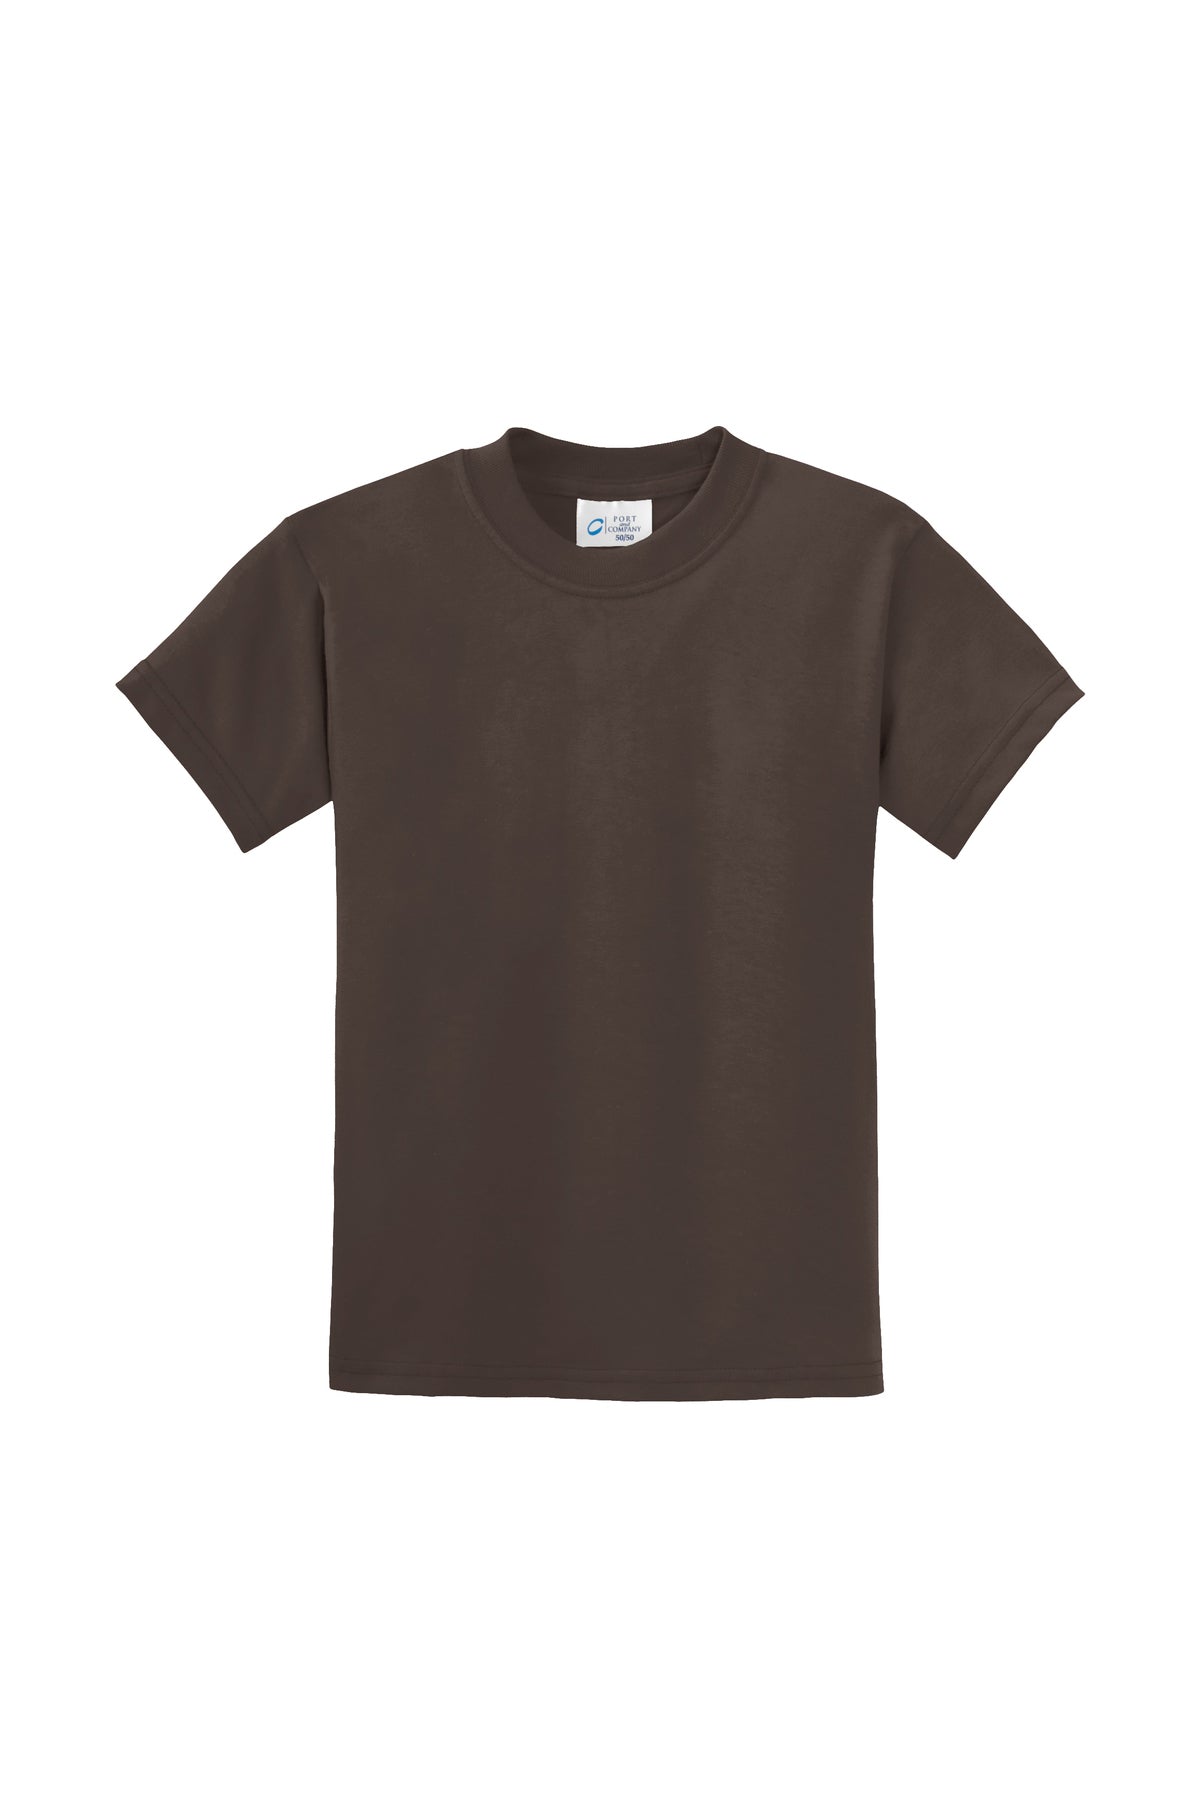 PC55Y Port & Company® Youth Core Blend Tee. XS-XL